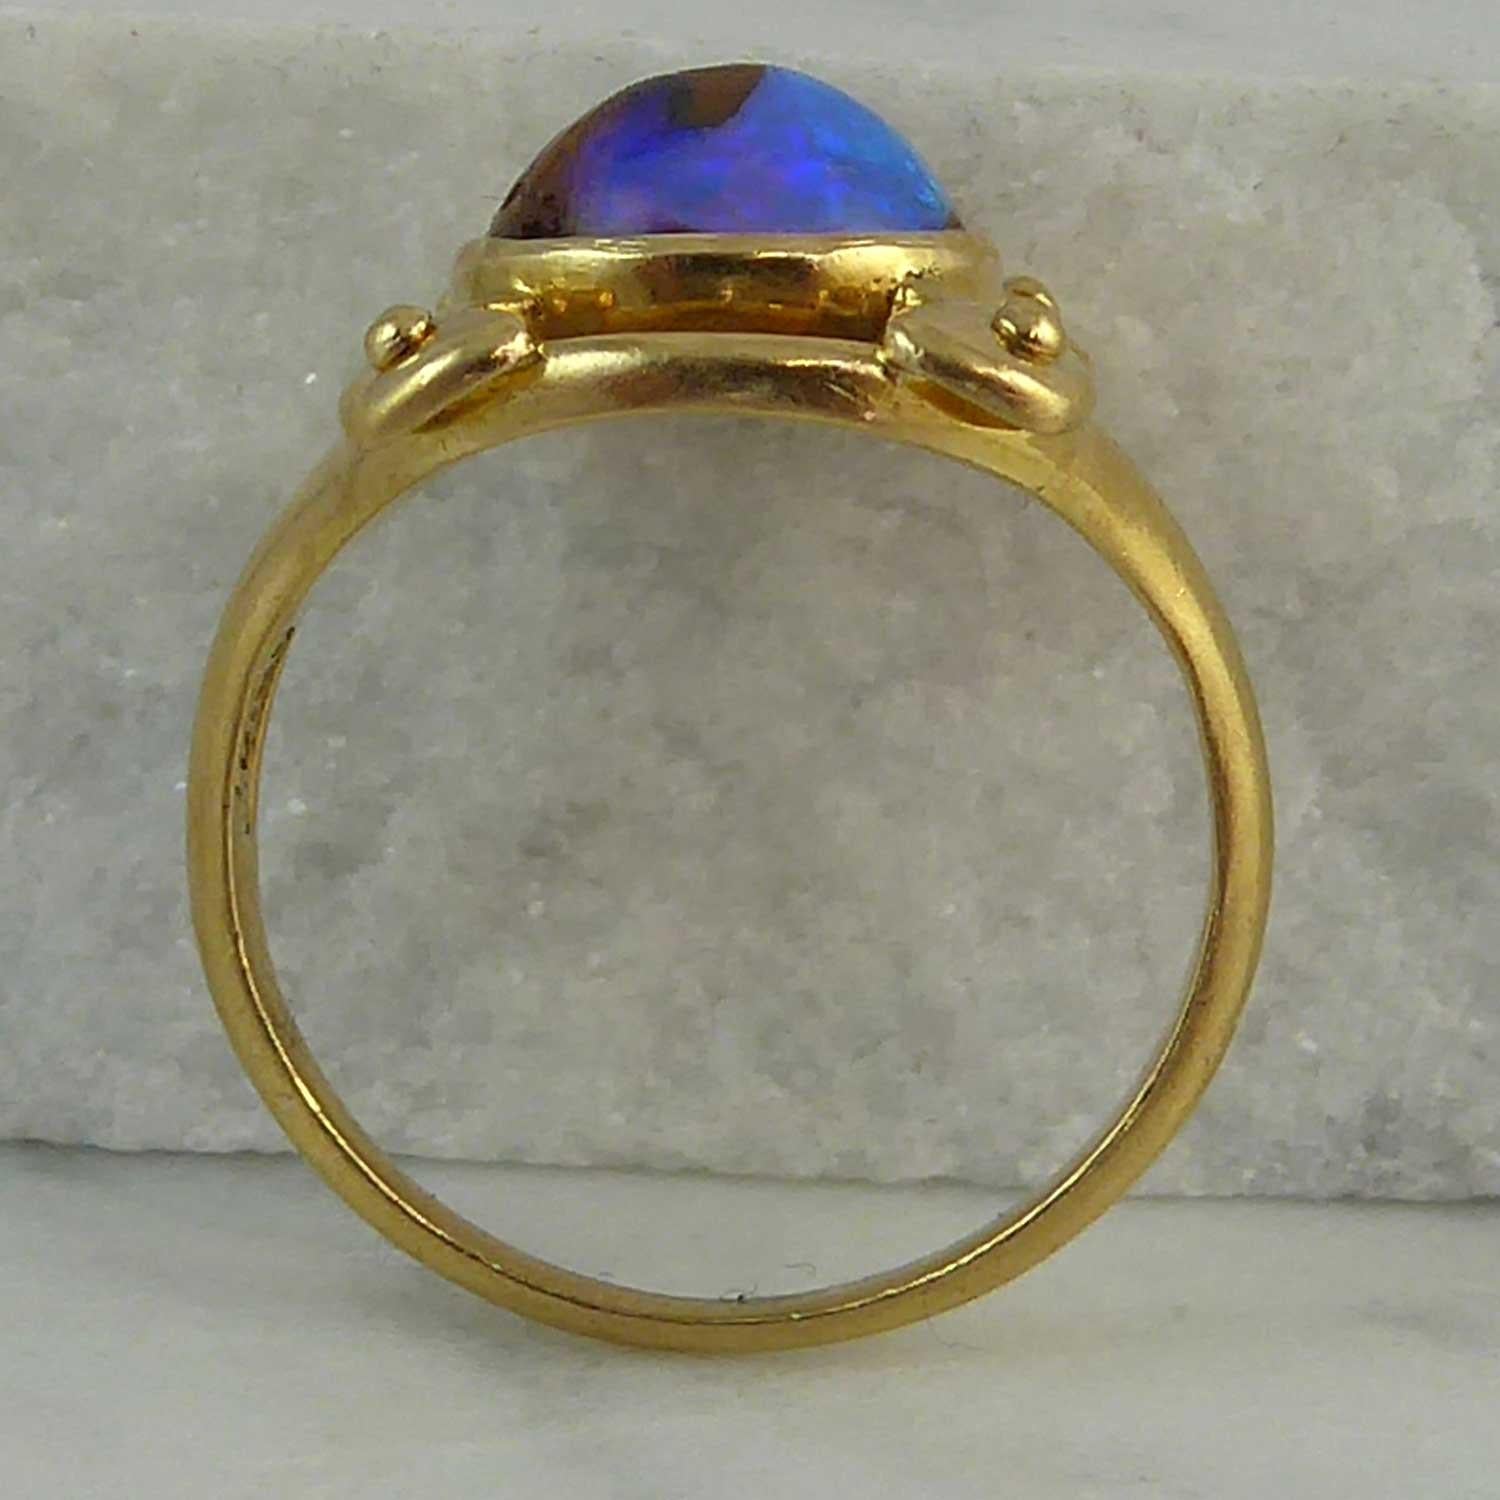 Arts and Crafts Murrle Bennet & Co. Opal Ring, Arts & Crafts, circa 1910, 18 Karat Yellow Gold